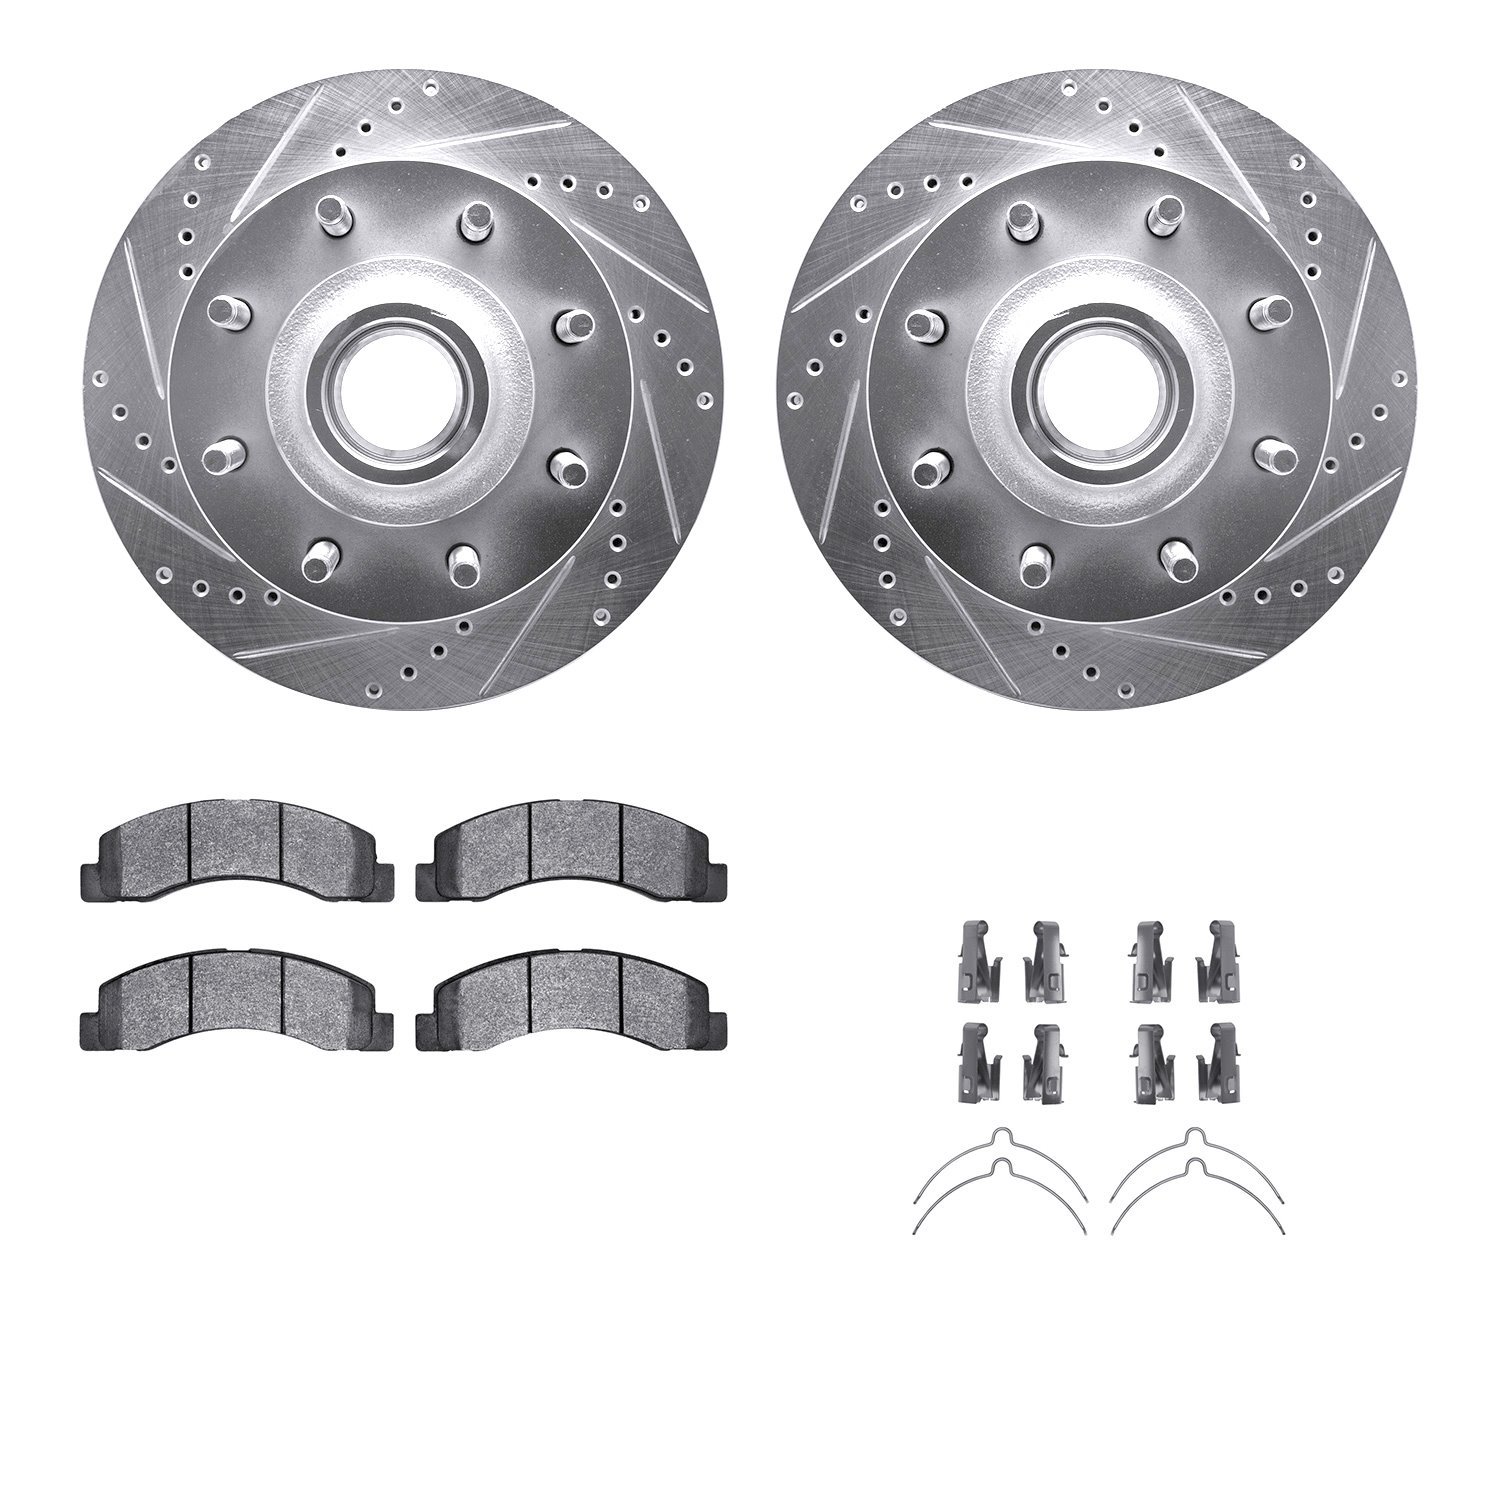 7212-99152 Drilled/Slotted Rotors w/Heavy-Duty Brake Pads Kit & Hardware [Silver], 1999-2002 Ford/Lincoln/Mercury/Mazda, Positio